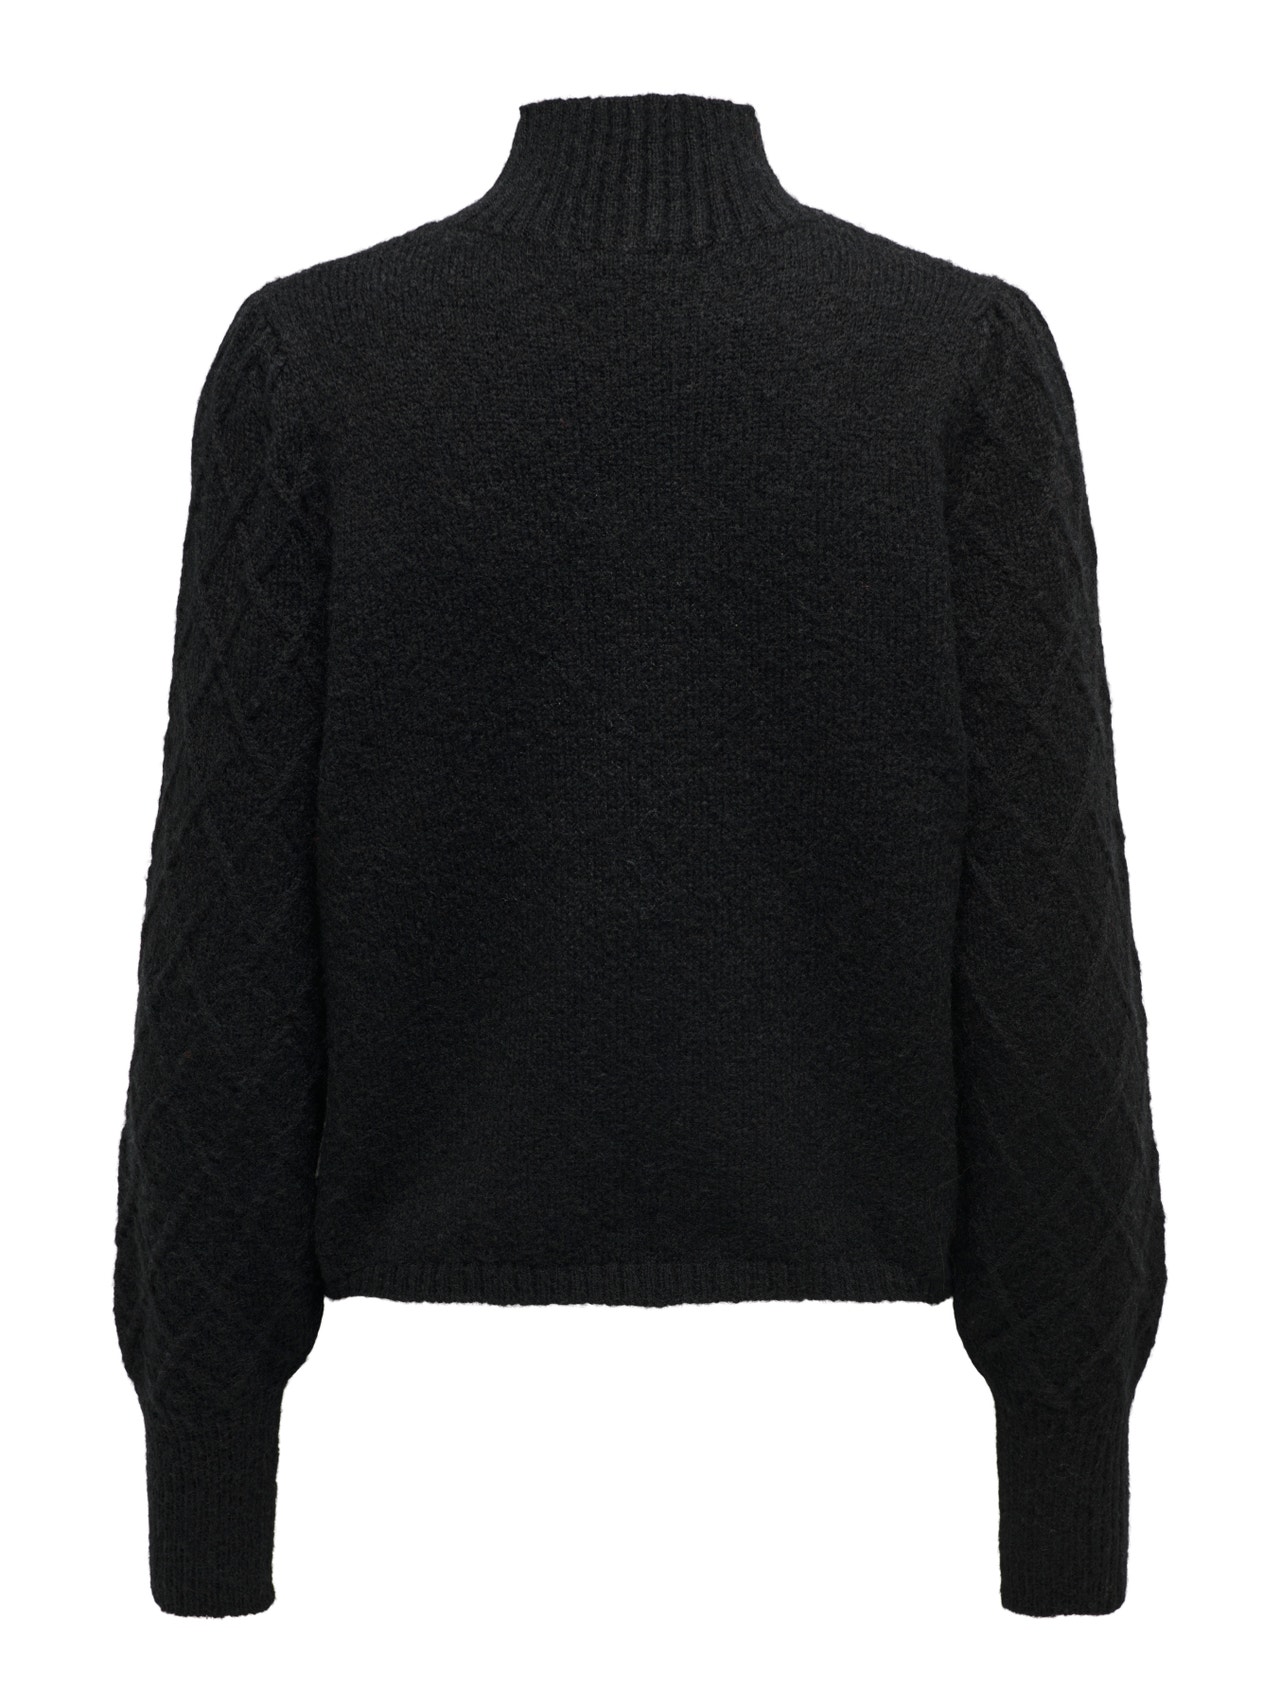 ONLY Knit pullover with high neck -Black - 15300330